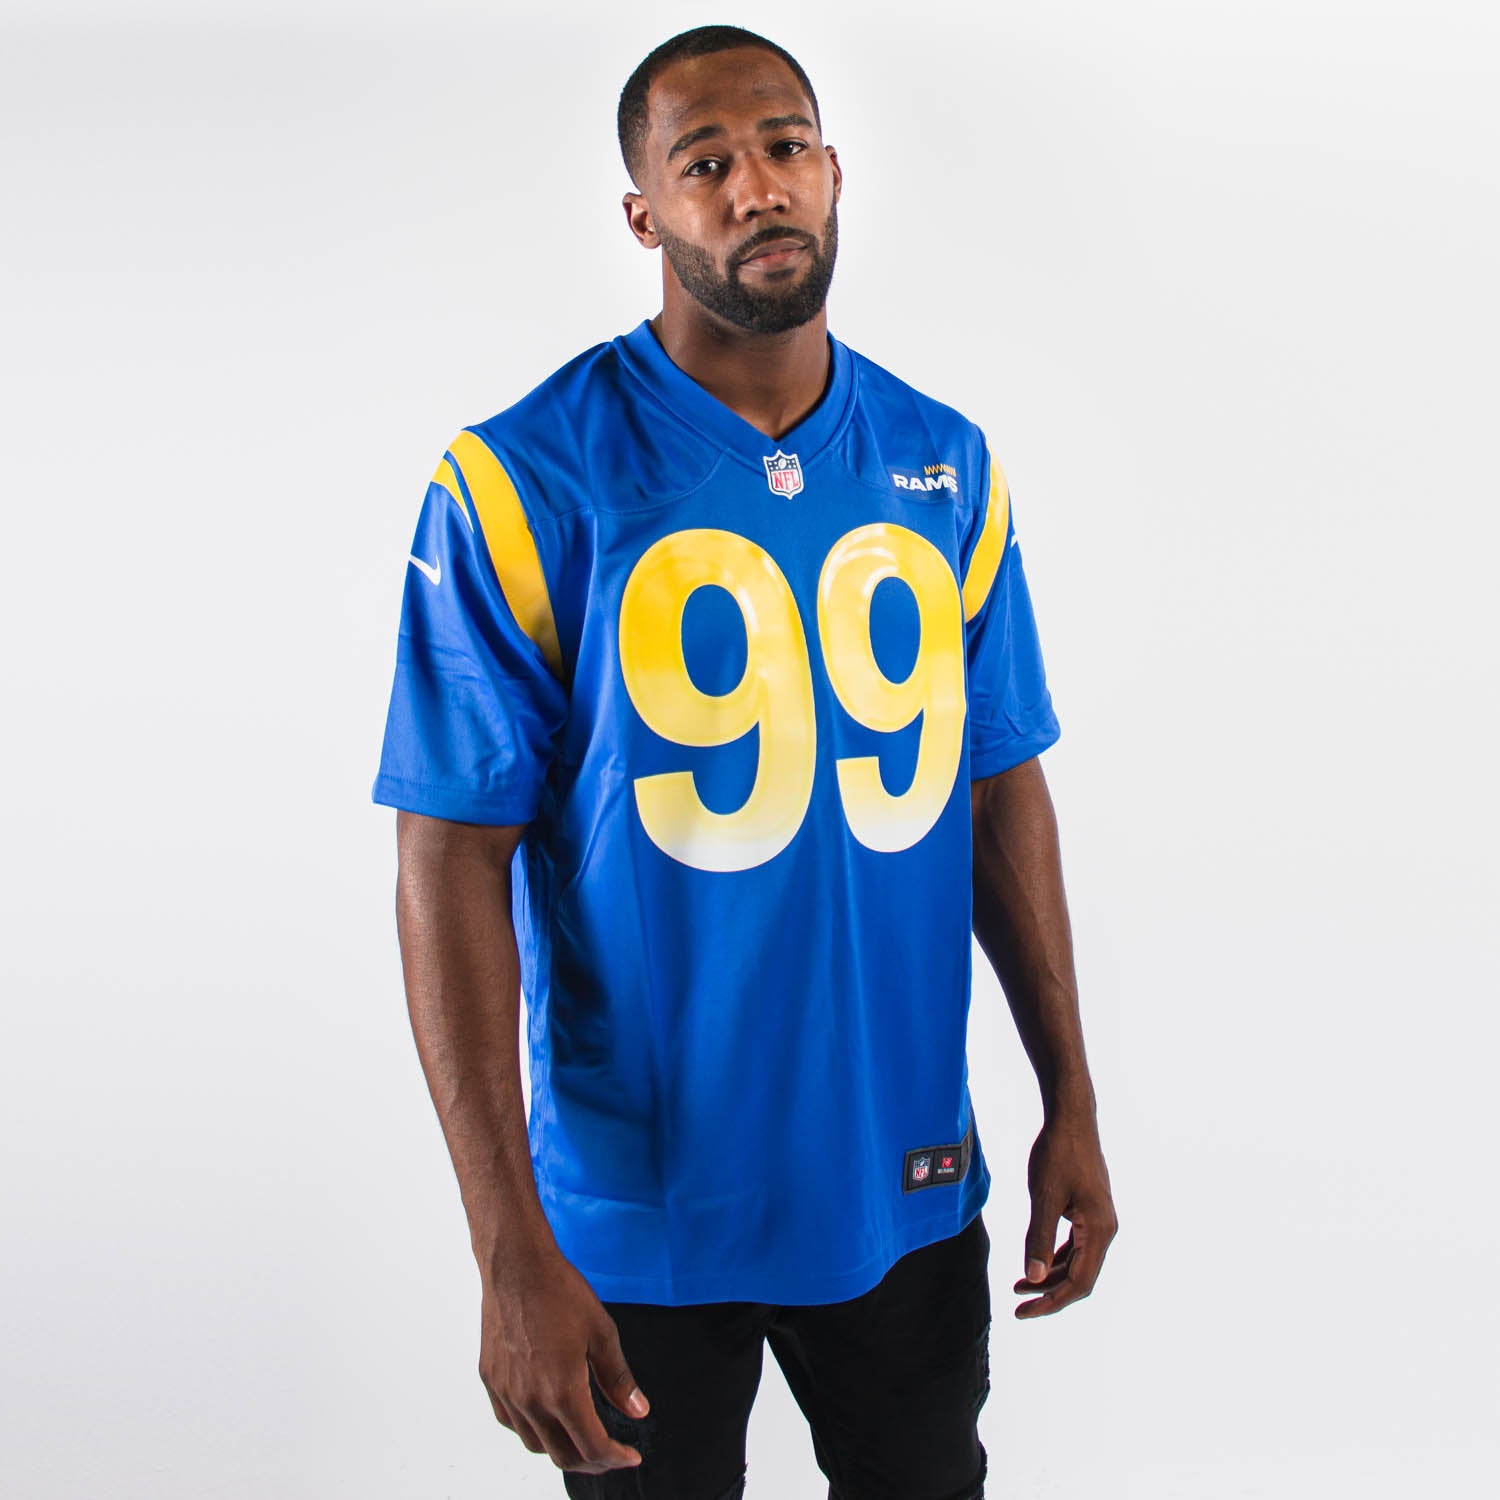 Rams basketball jersey collection